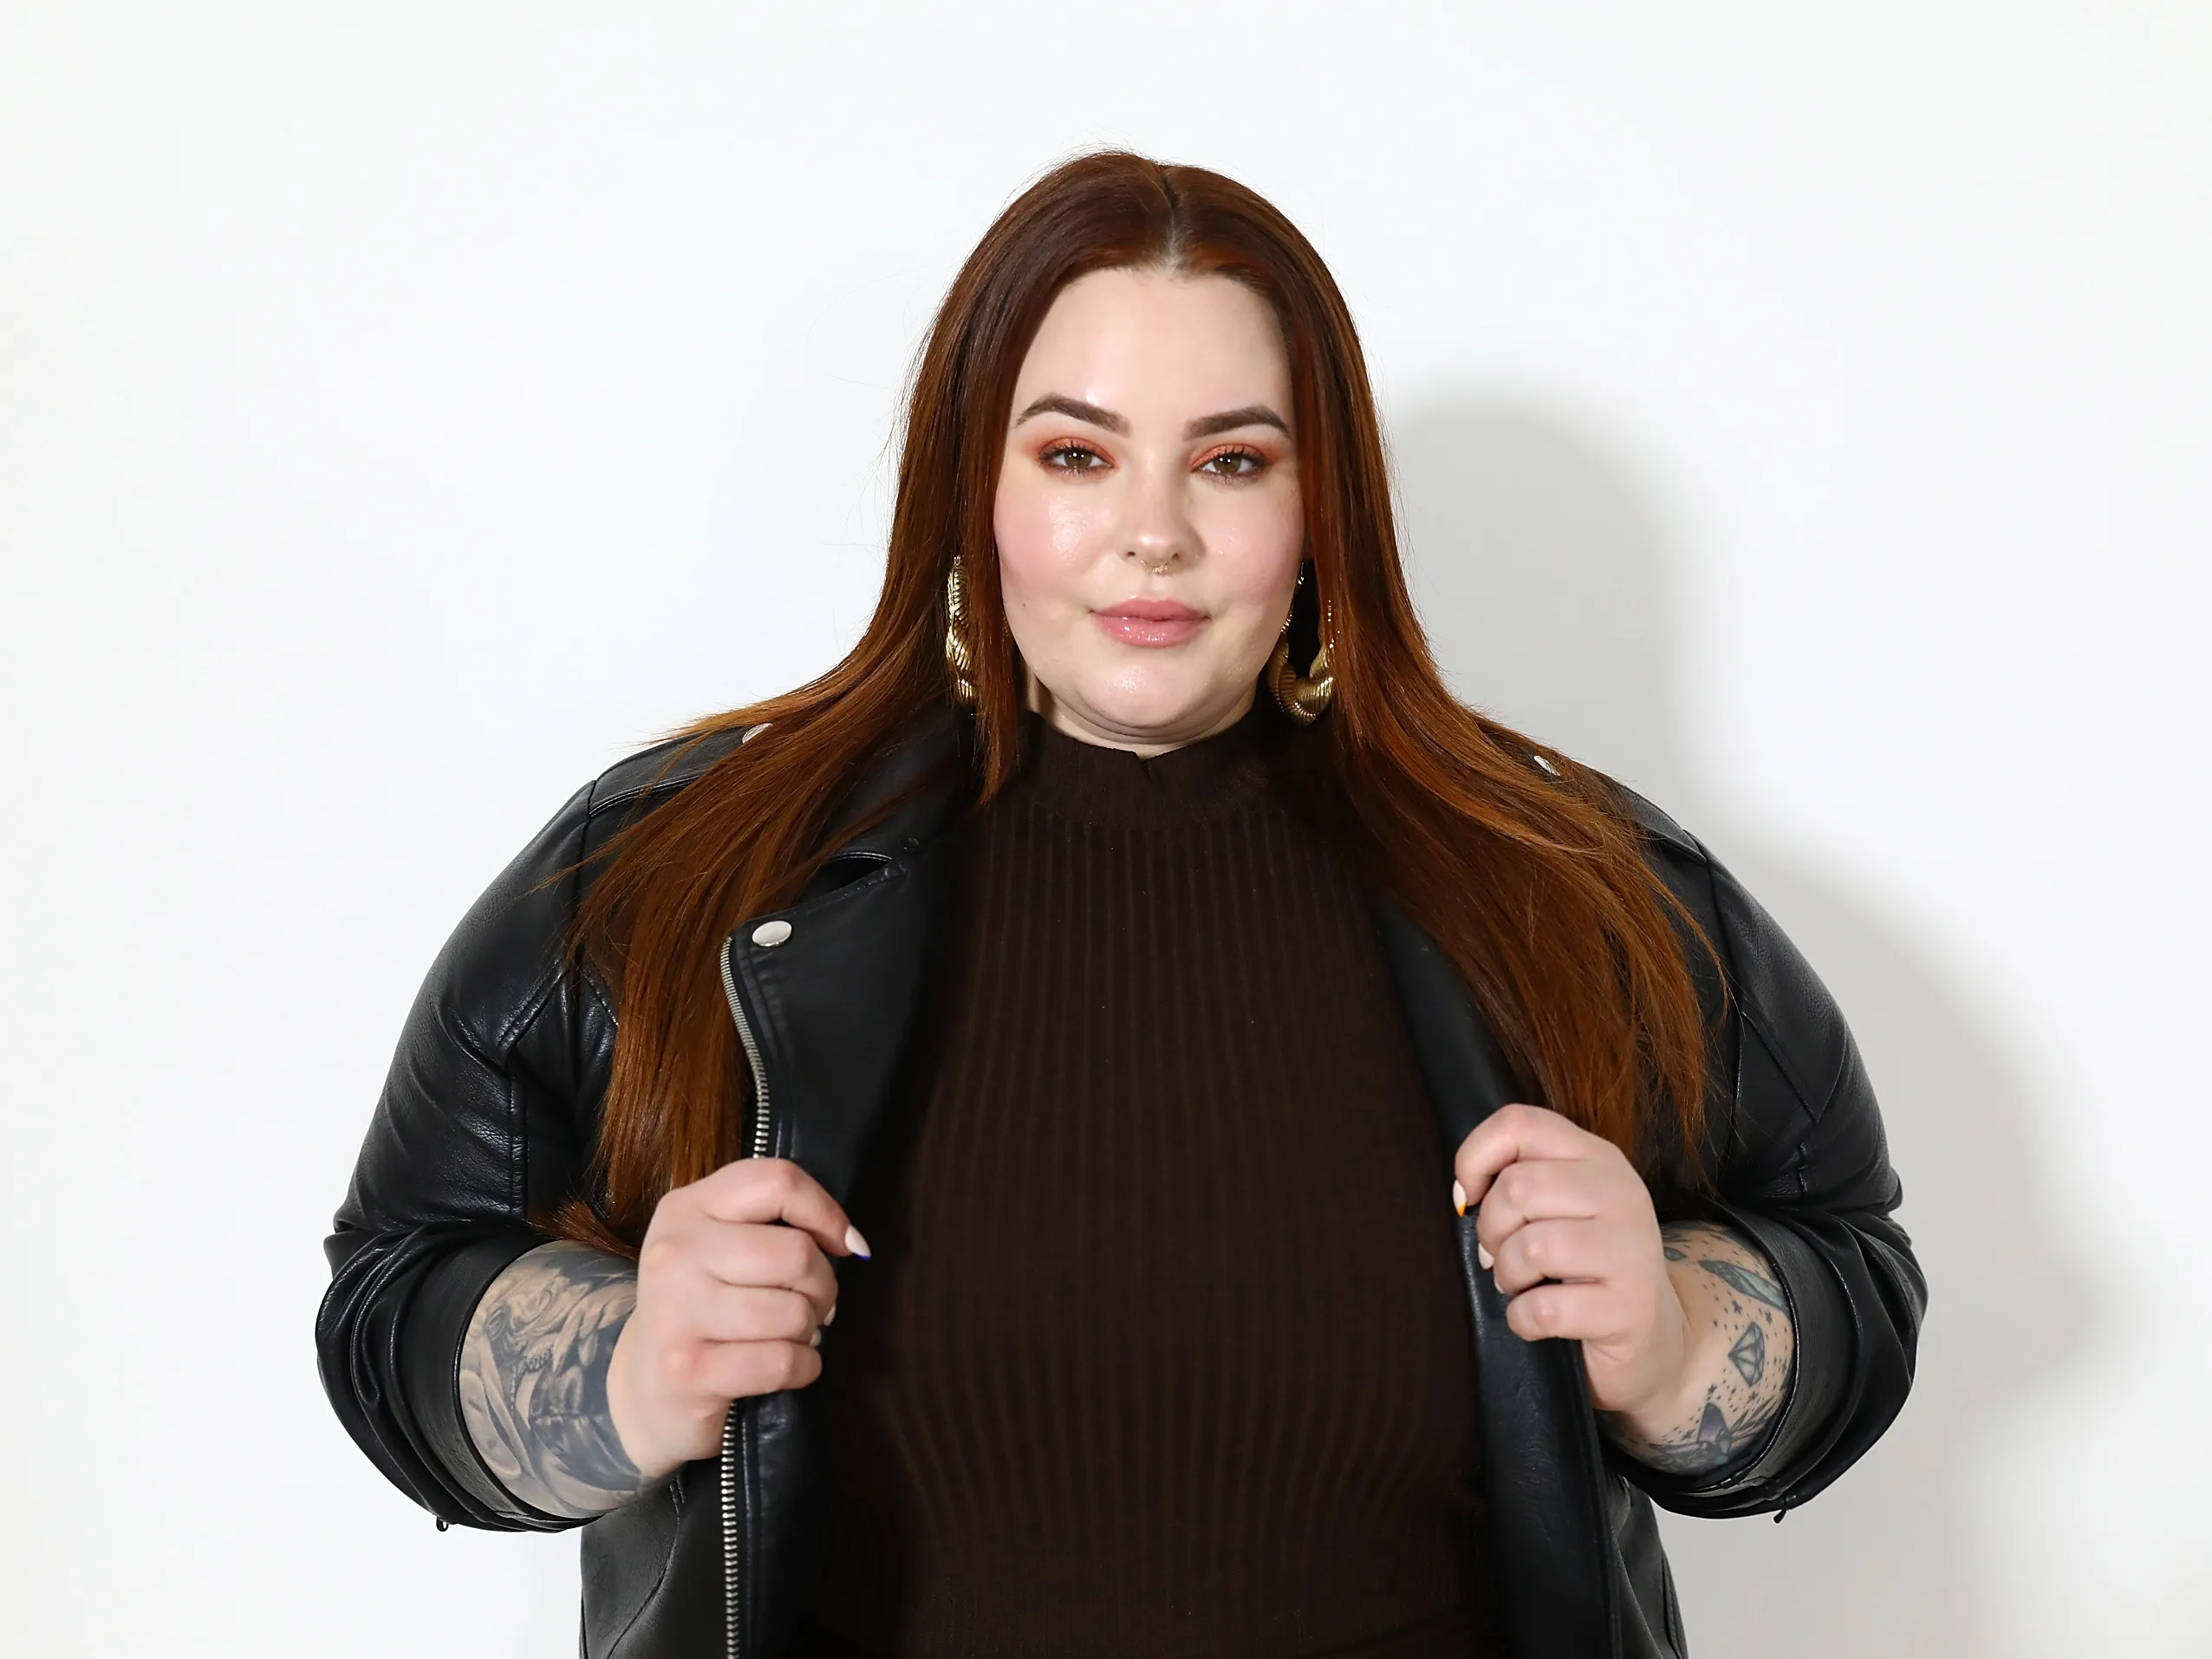 Tess Holliday Net Worth 2023-Biography, Age, Height, Husband, Weight